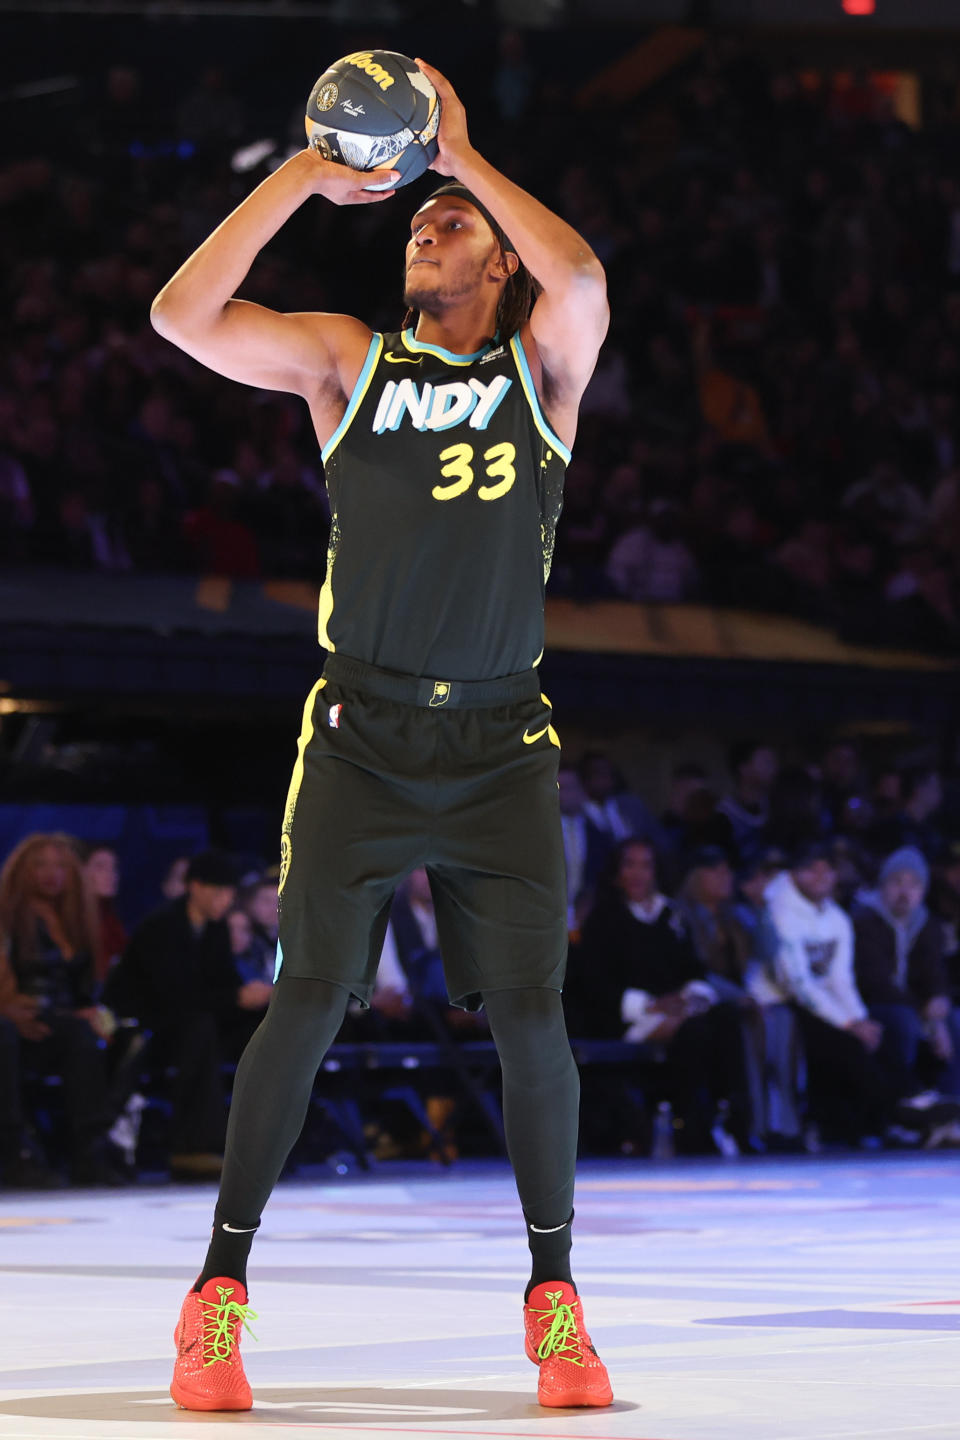 INDIANAPOLIS, INDIANA - FEBRUARY 17: Myles Turner #33 of the Indiana Pacers participates in the 2024 Kia Skills Challenge during the State Farm All-Star Saturday Night at Lucas Oil Stadium on February 17, 2024 in Indianapolis, Indiana. NOTE TO USER: User expressly acknowledges and agrees that, by downloading and or using this photograph, User is consenting to the terms and conditions of the Getty Images License Agreement. (Photo by Stacy Revere/Getty Images)